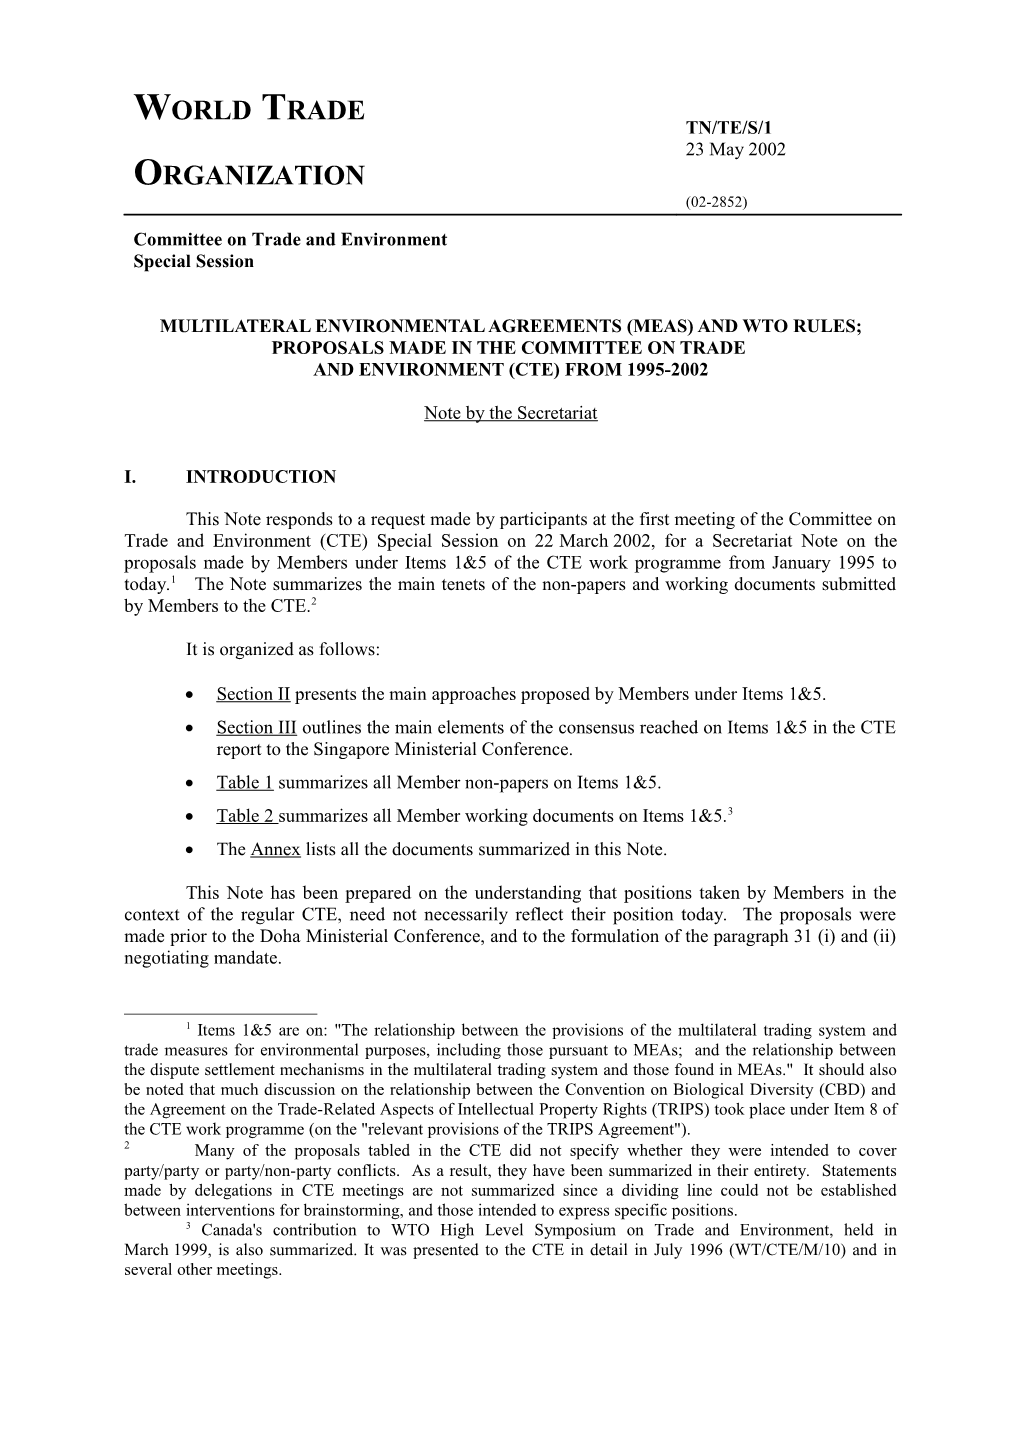 Multilateral Environmental Agreements (Meas) and Wto Rules;